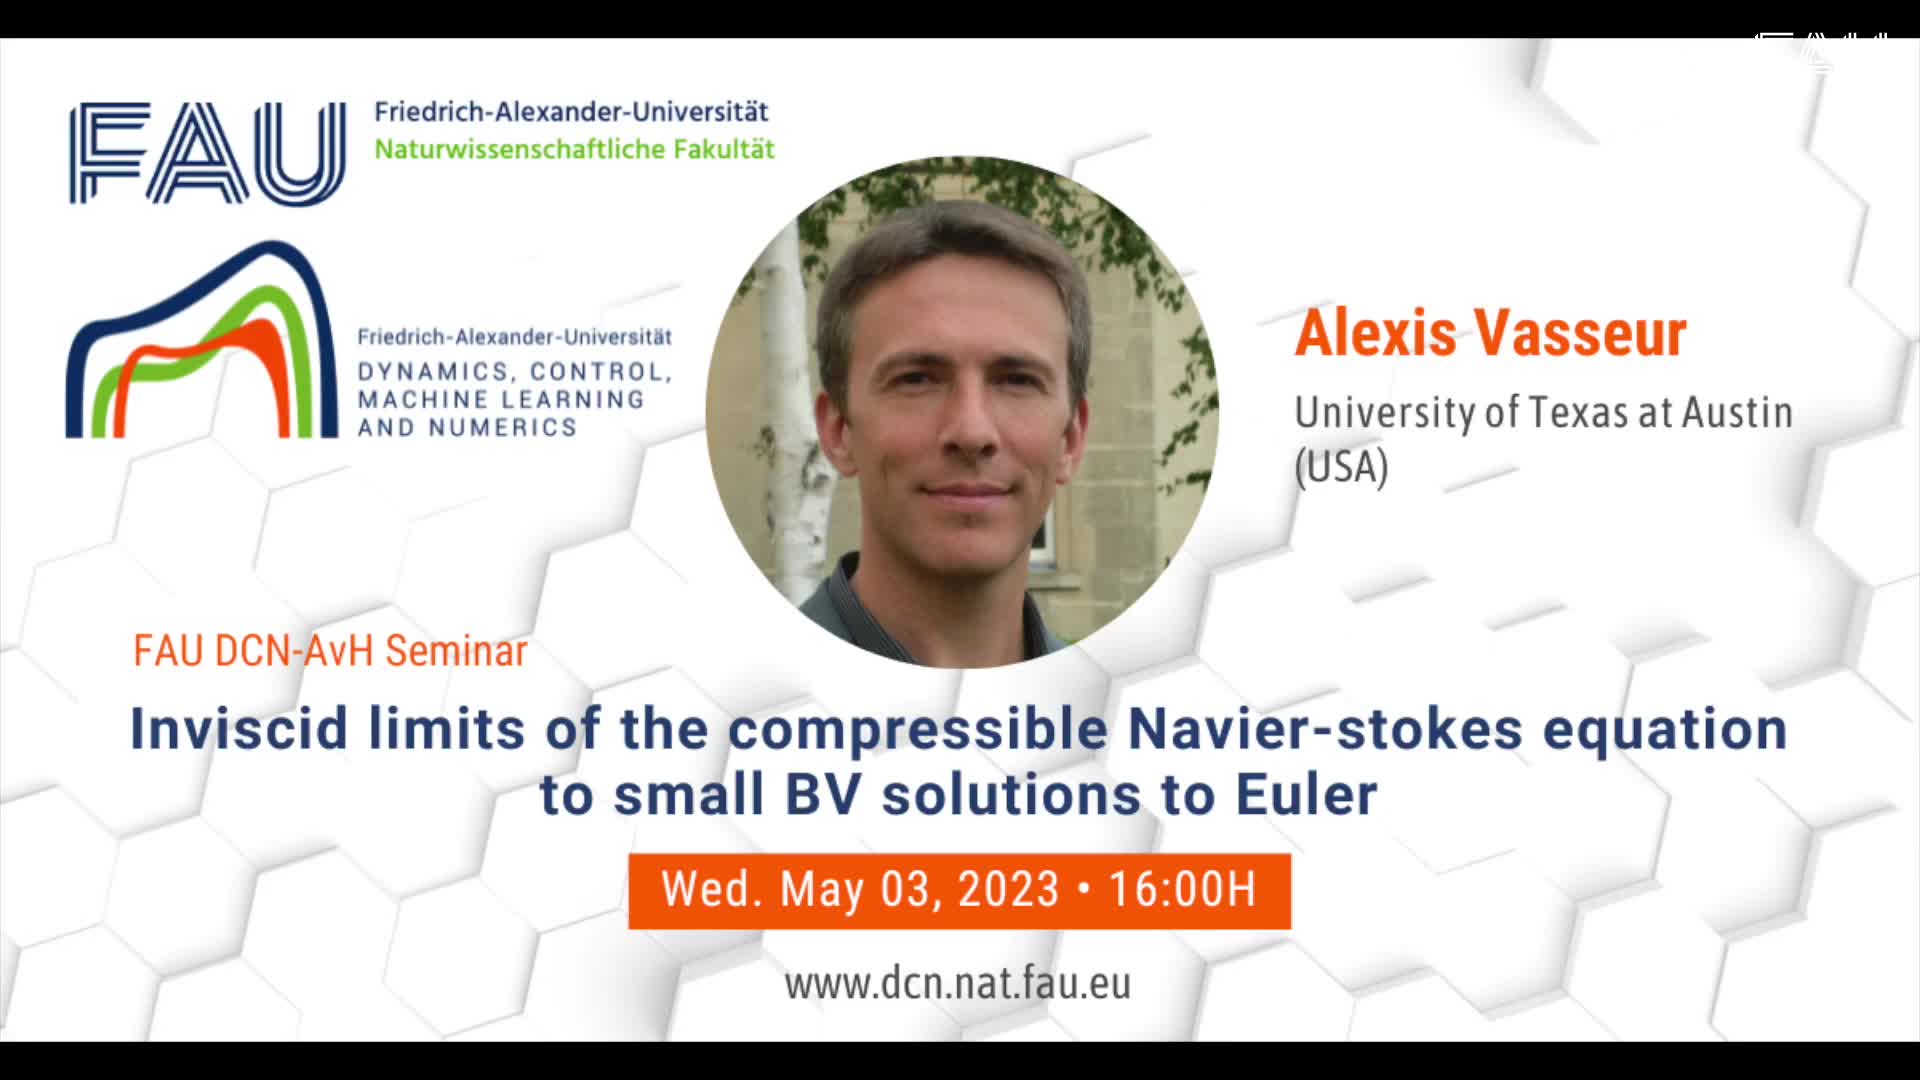 FAU DCN-AvH Seminar: Inviscid limits of the compressible Navier-stokes equation to small BV solutions to Euler preview image